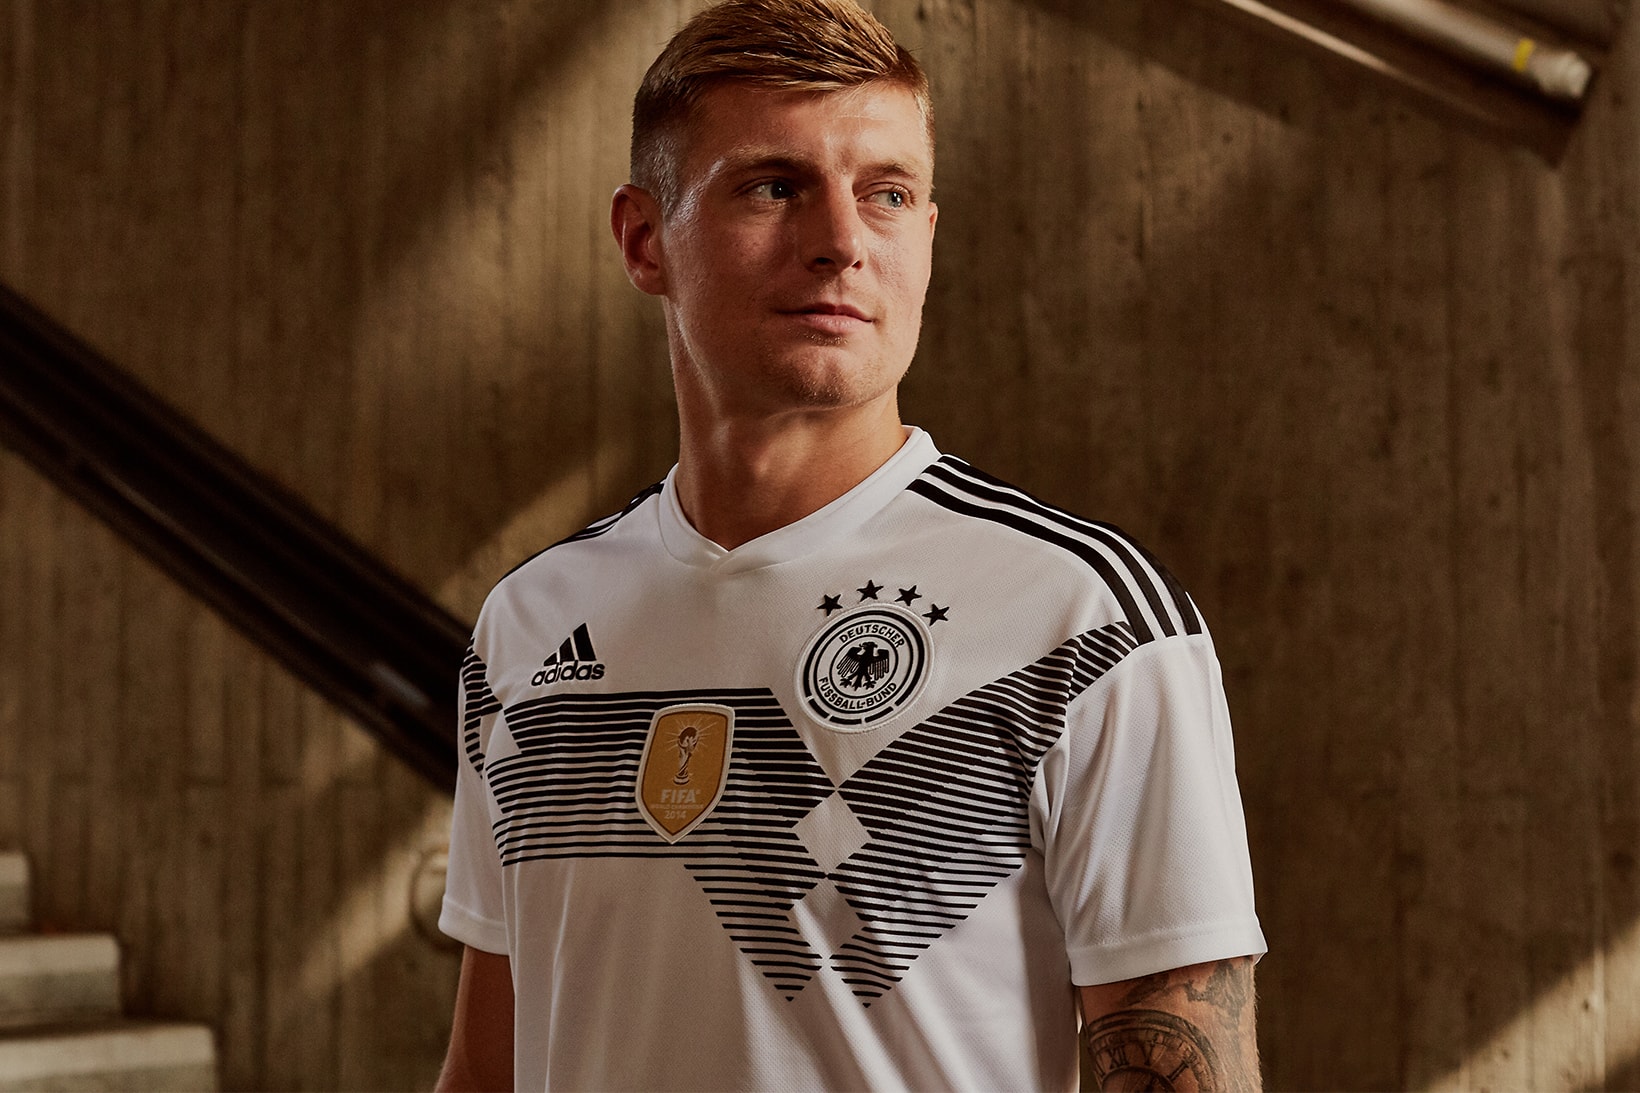 adidas Reveals Its Lineup of Federation Kits for the FIFA World Cup 2022™